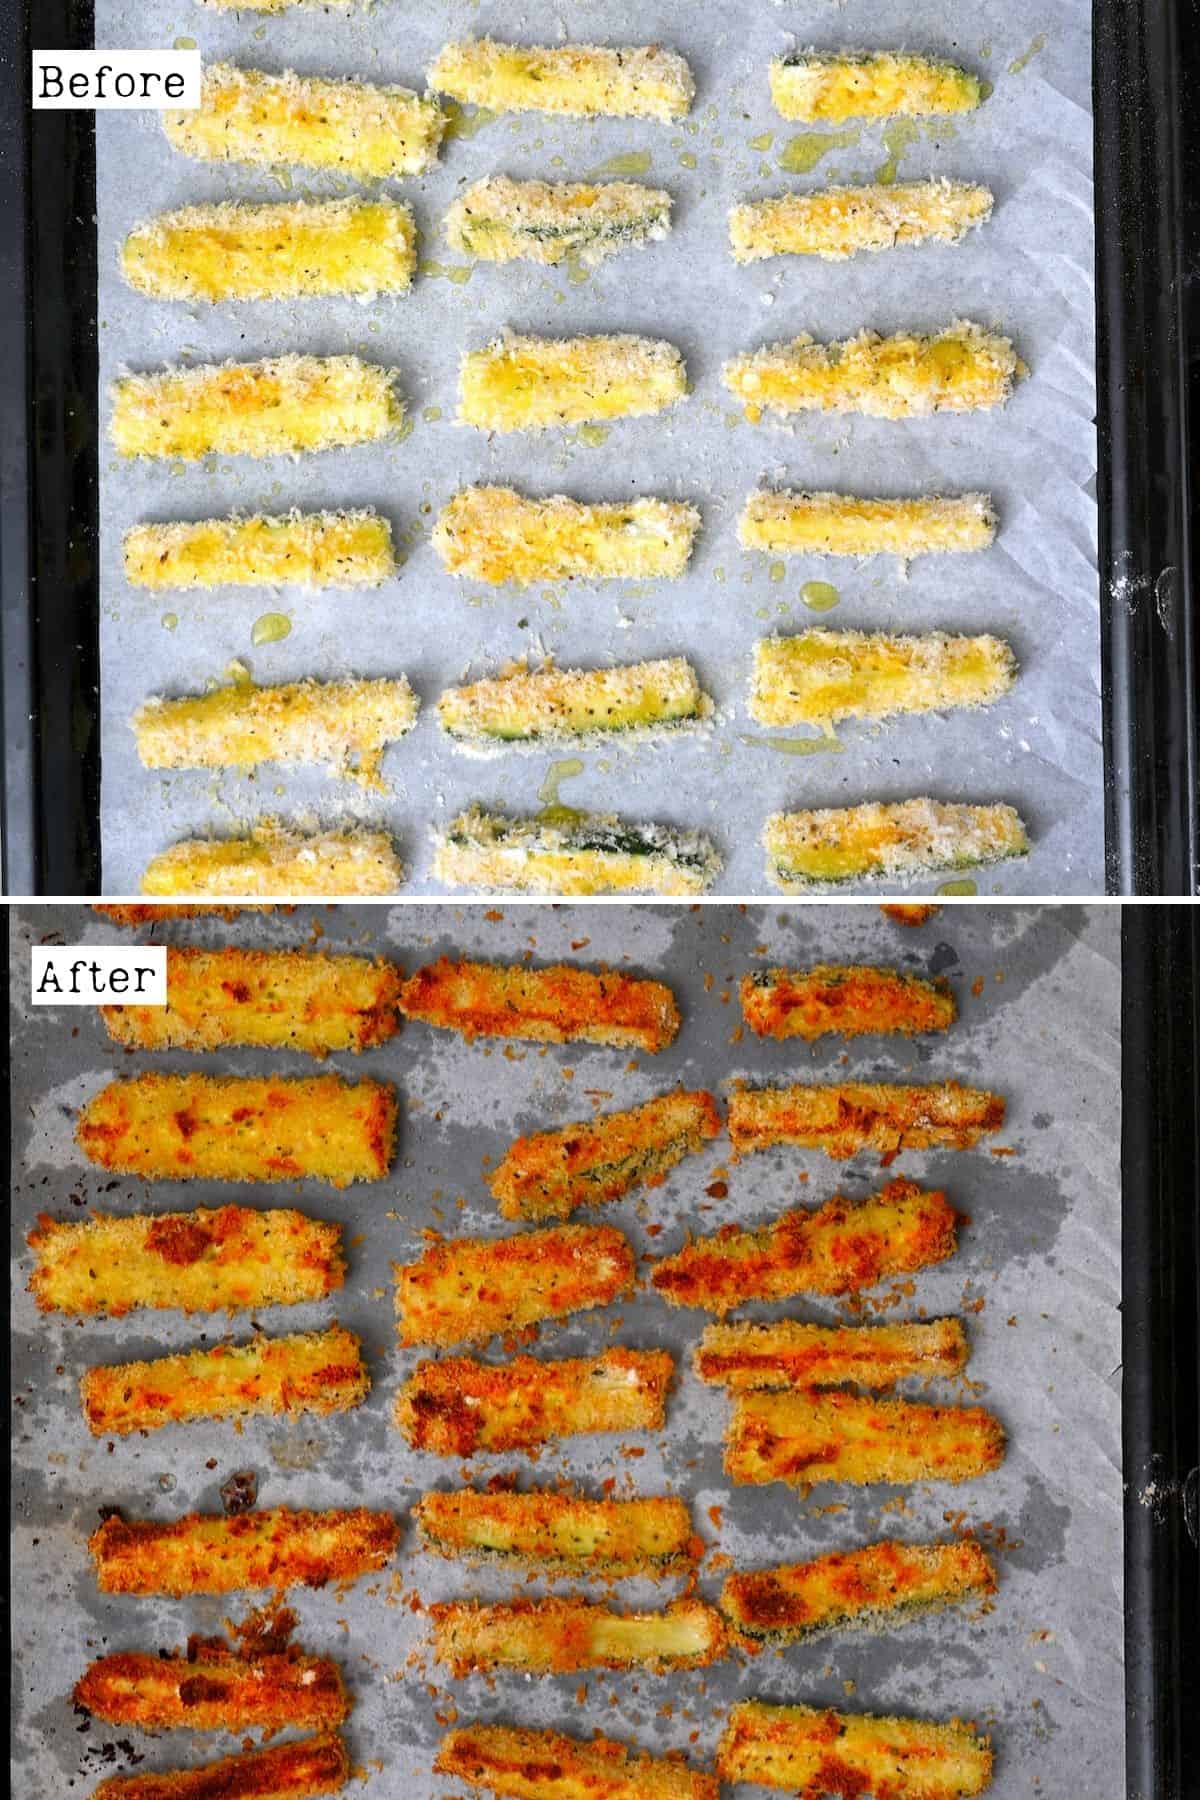 Before and after baking zucchini fries in an oven